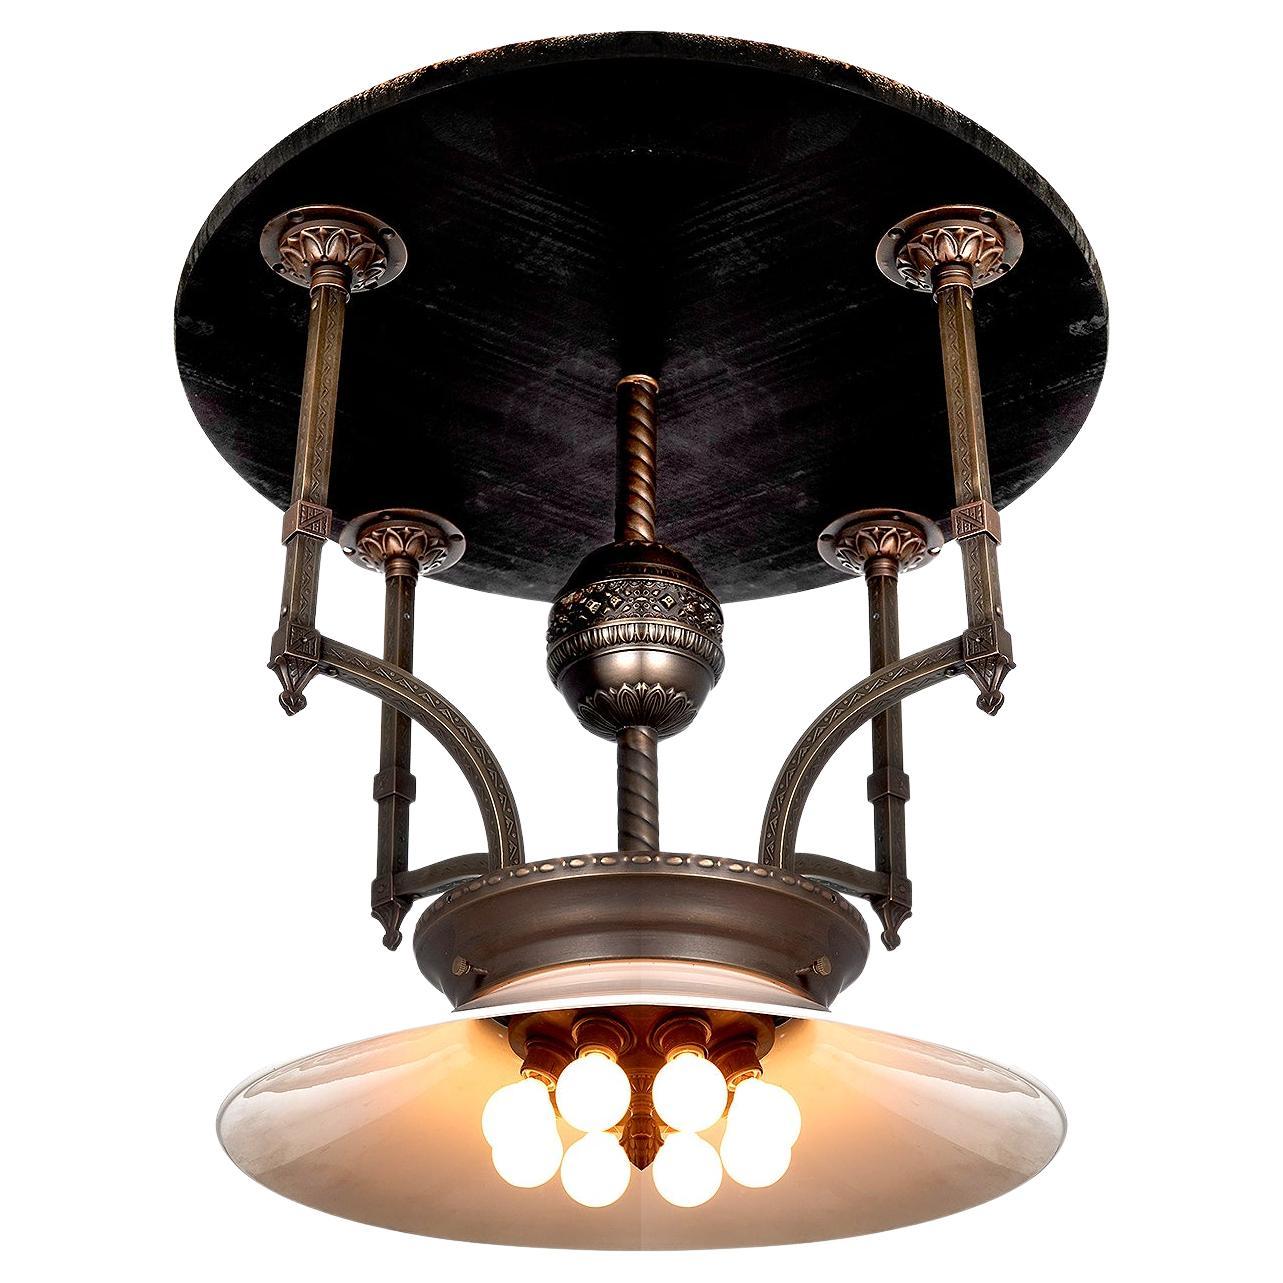 Early Railroad Center Lamp